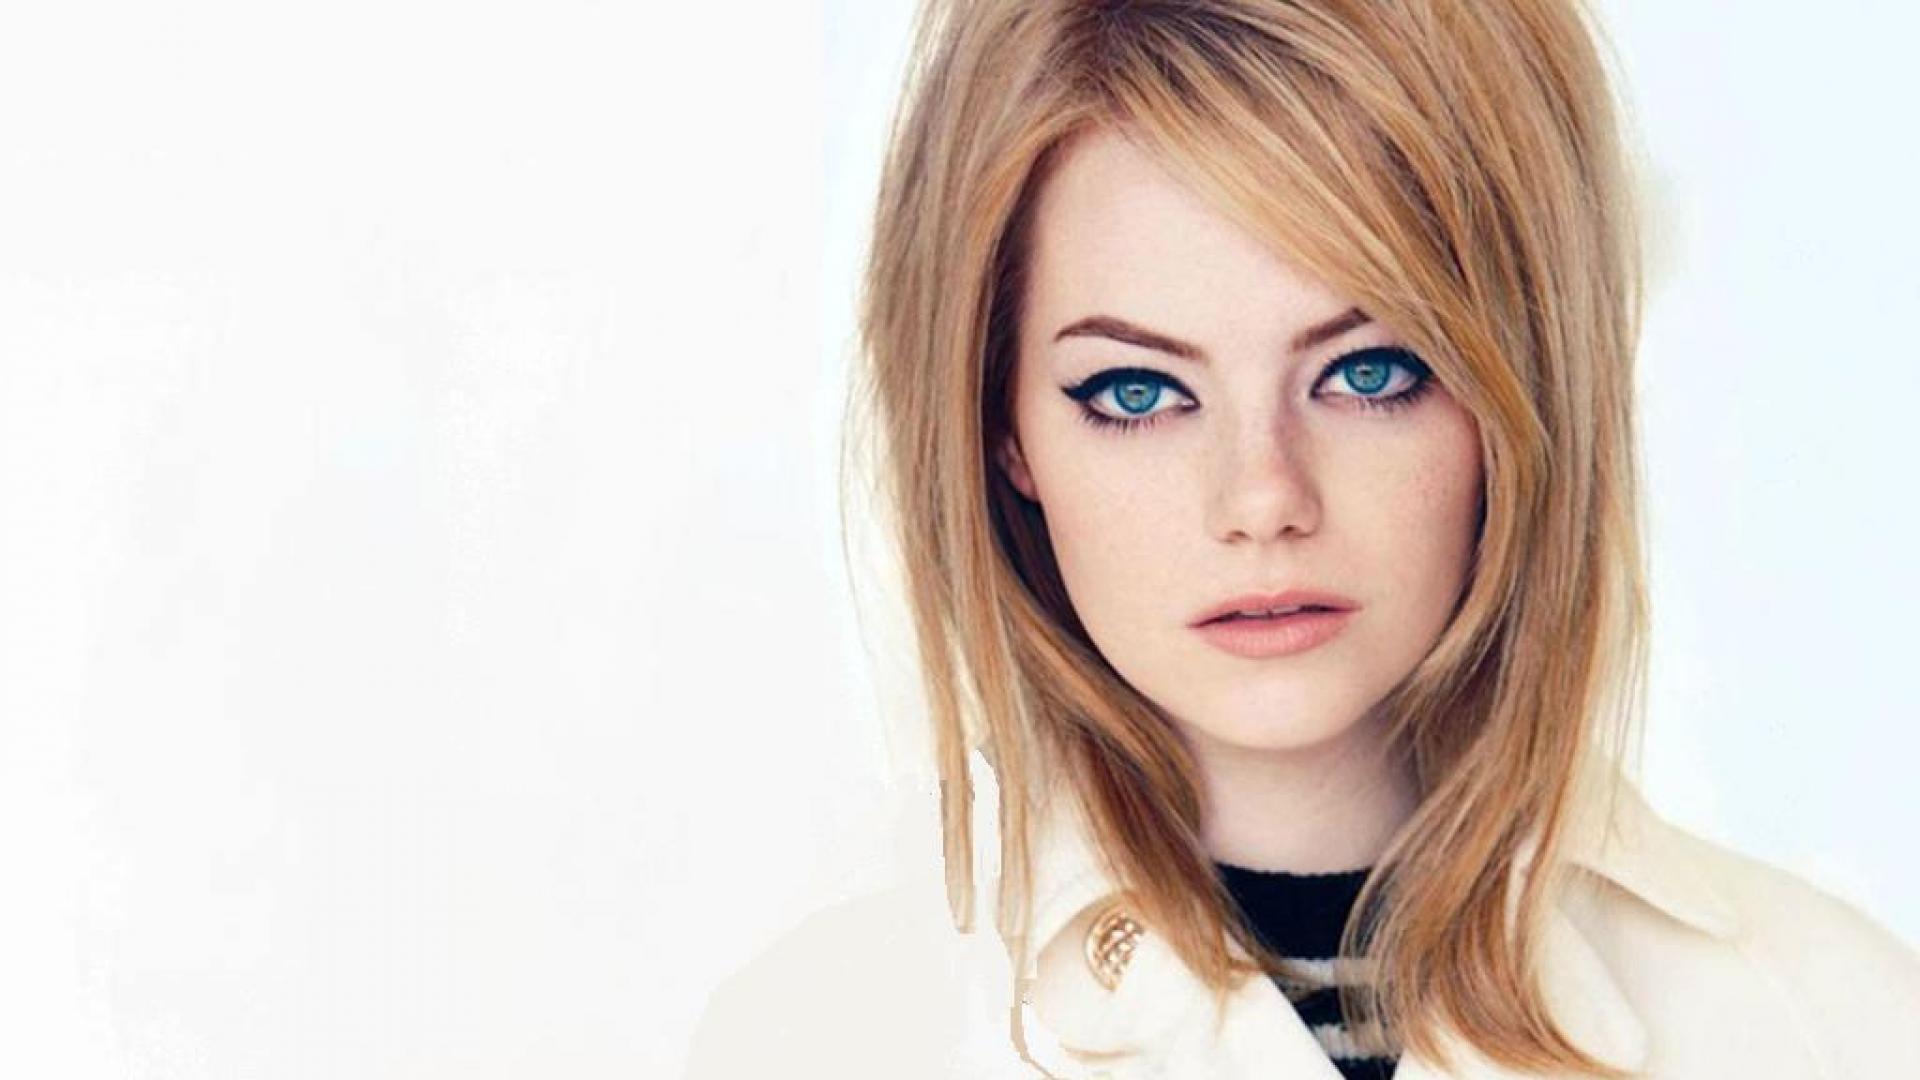 Free download Image for Emma Stone Wallpaper HD [1920x1080] for your